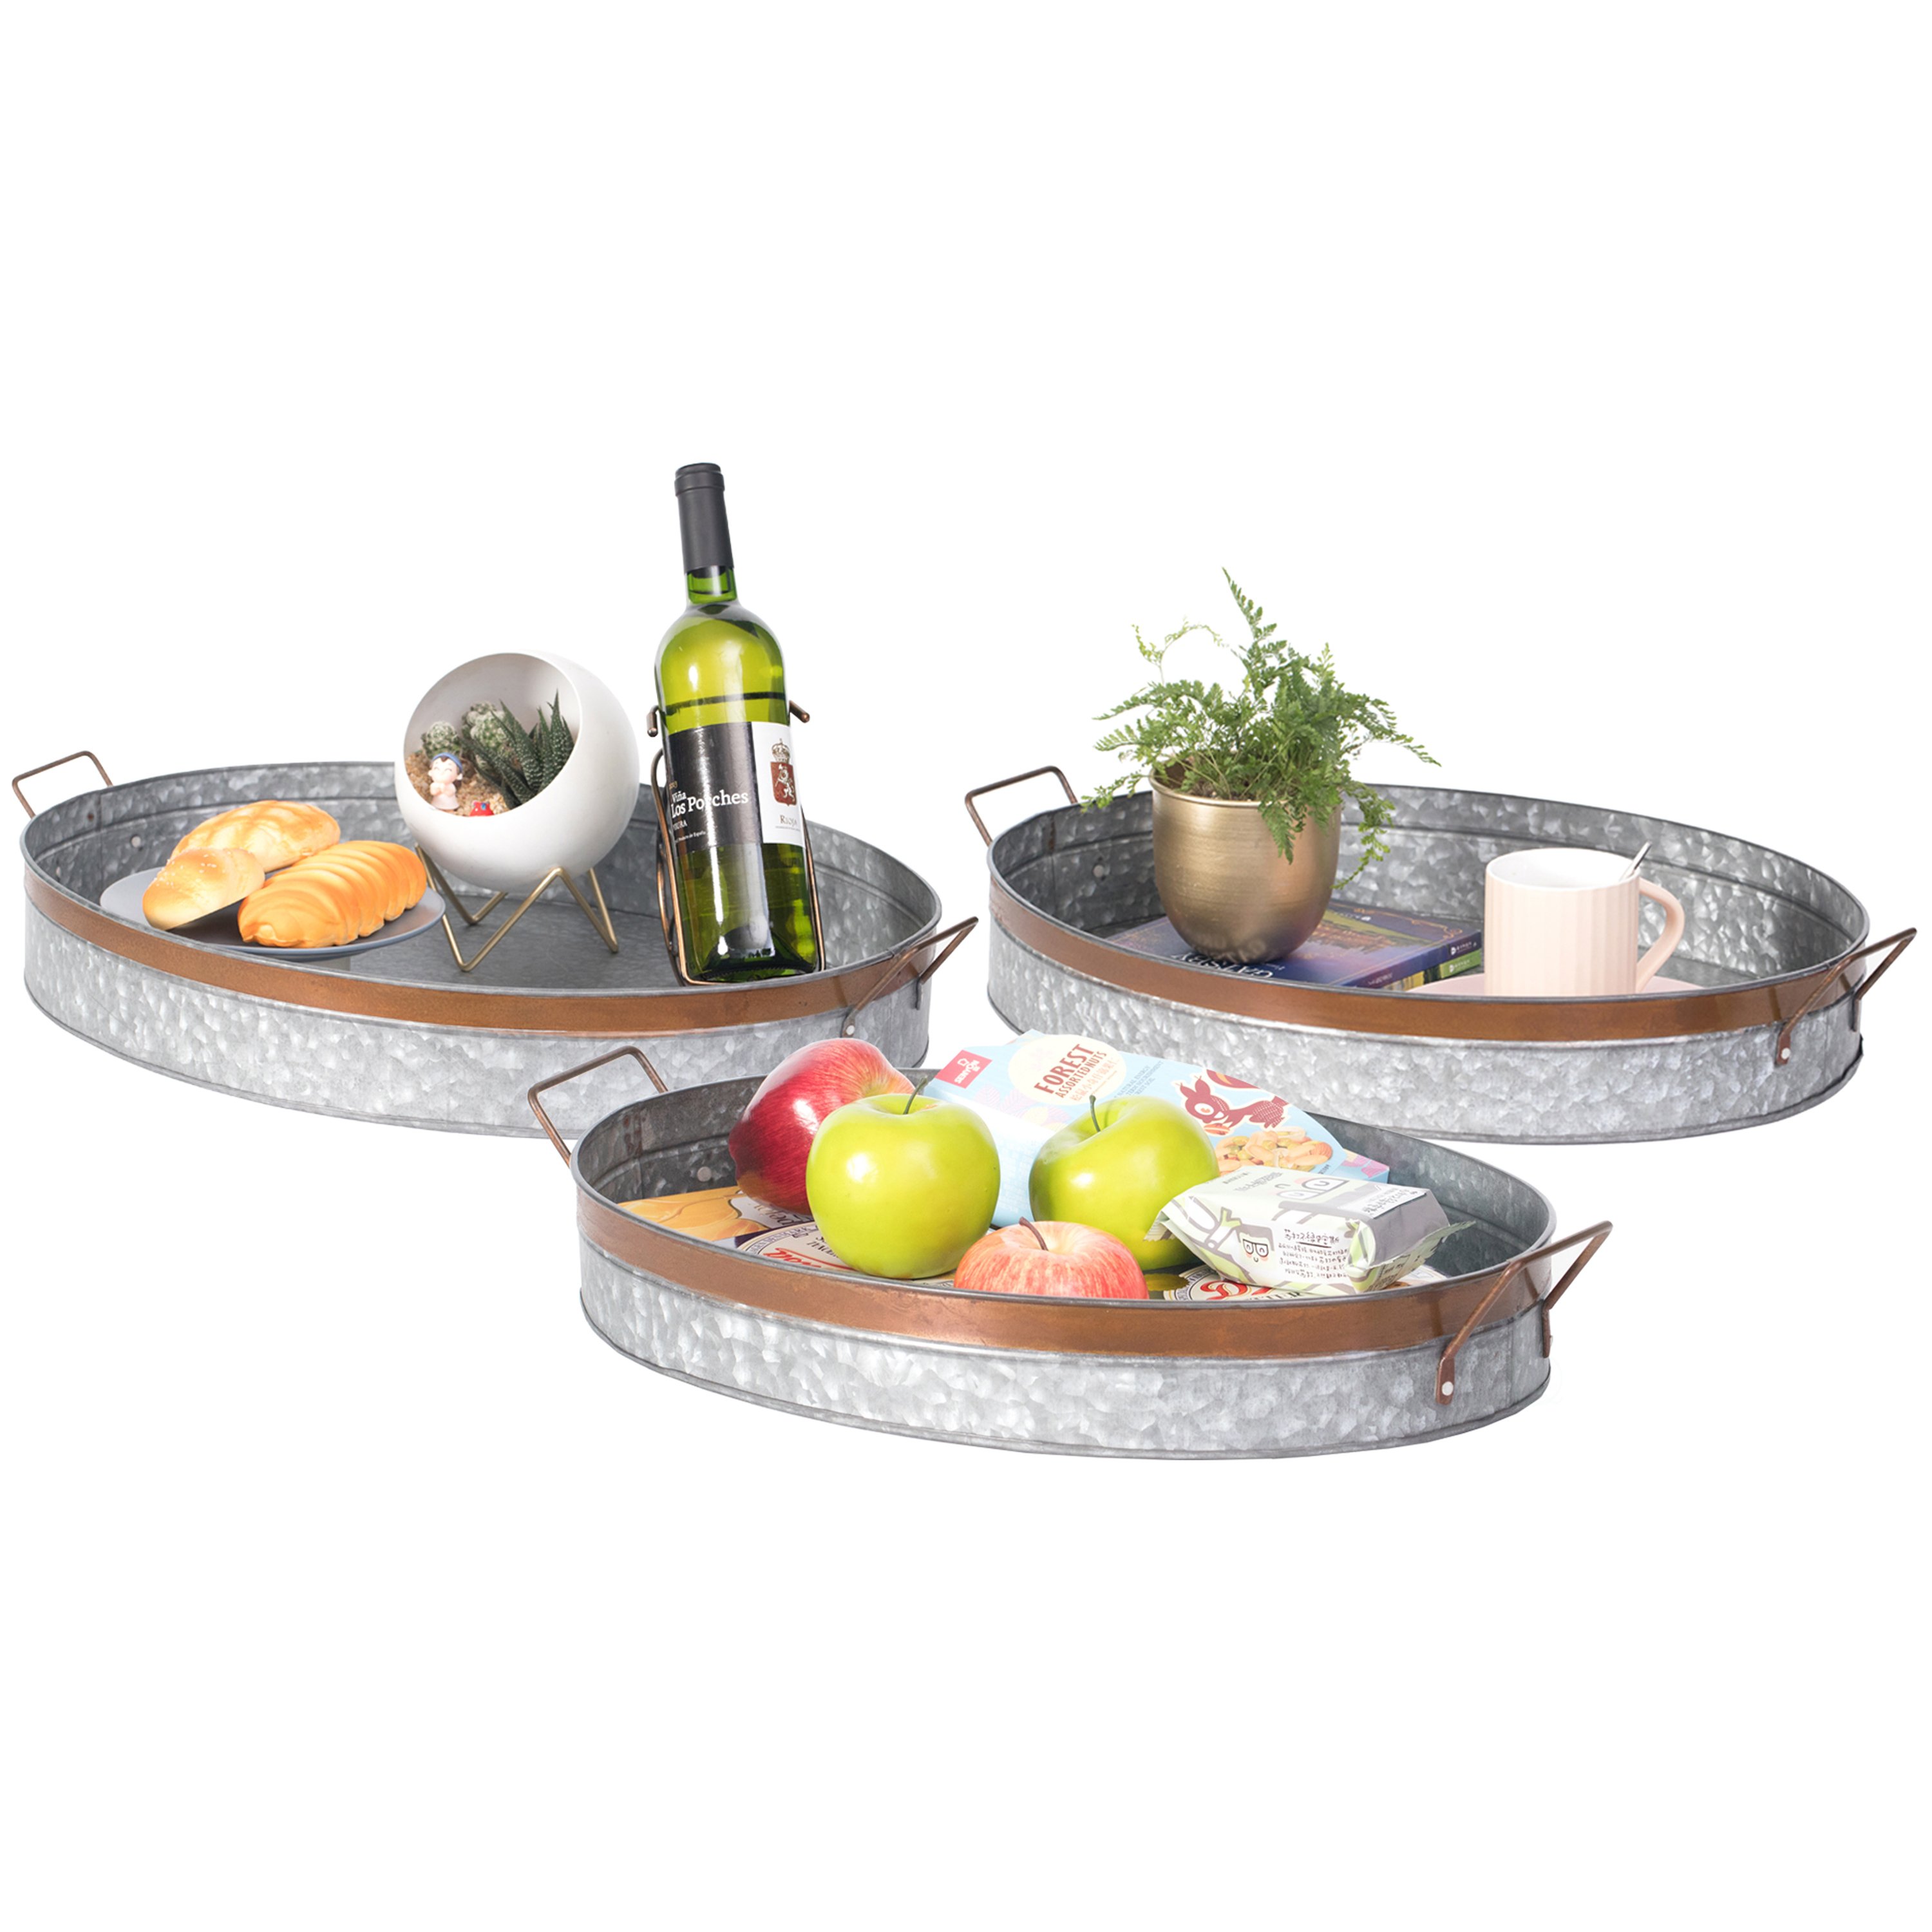 Galvanized Metal Oval Rustic Serving Tray With Handles - Large